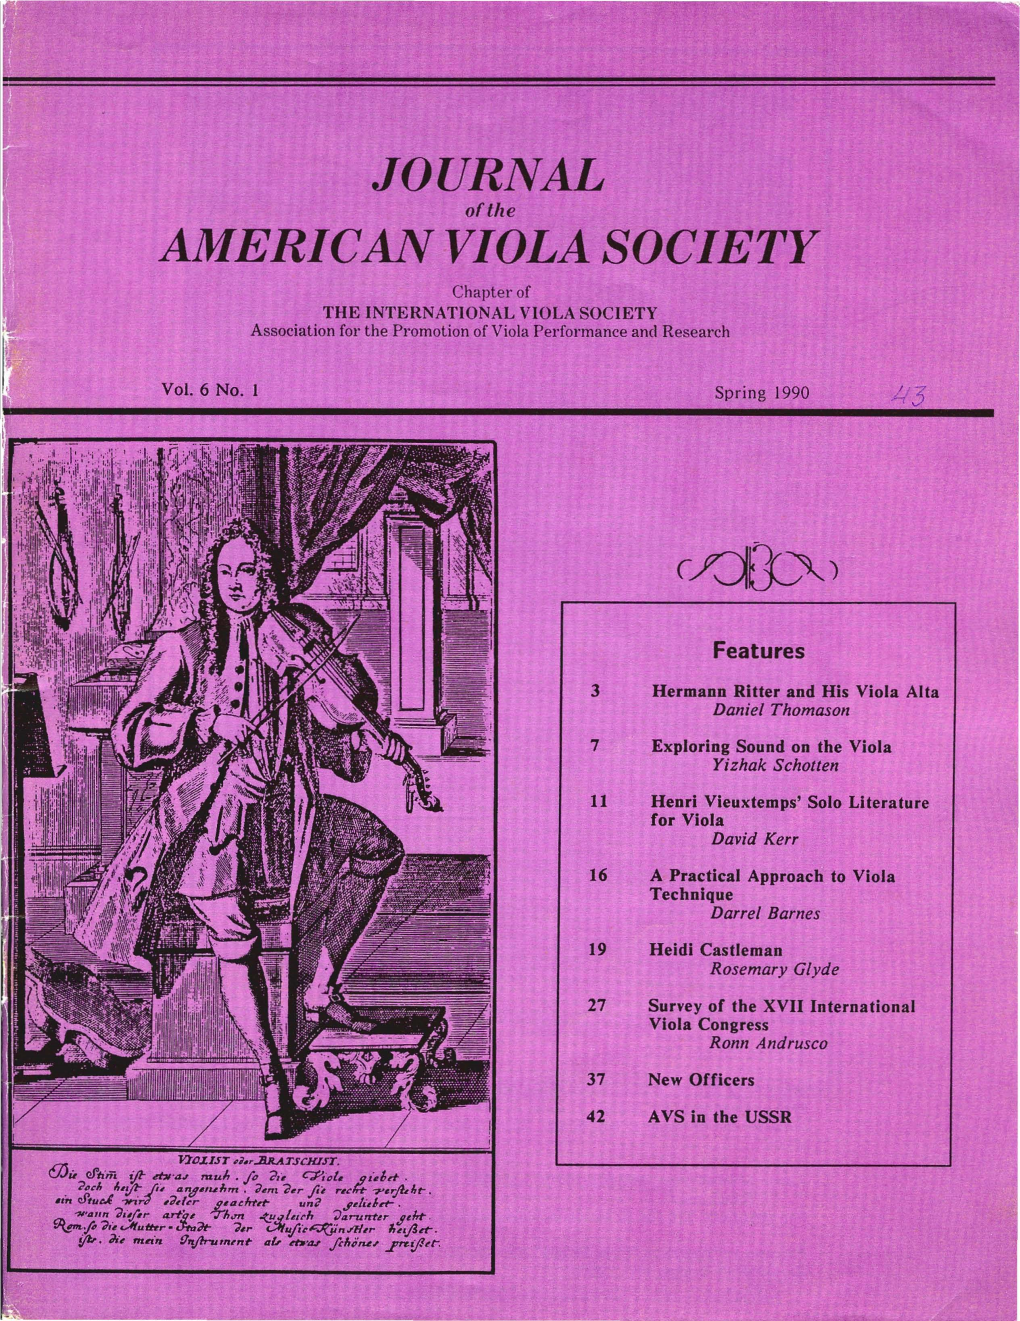 Journal of the American Viola Society Volume 6 No. 1, Spring 1990